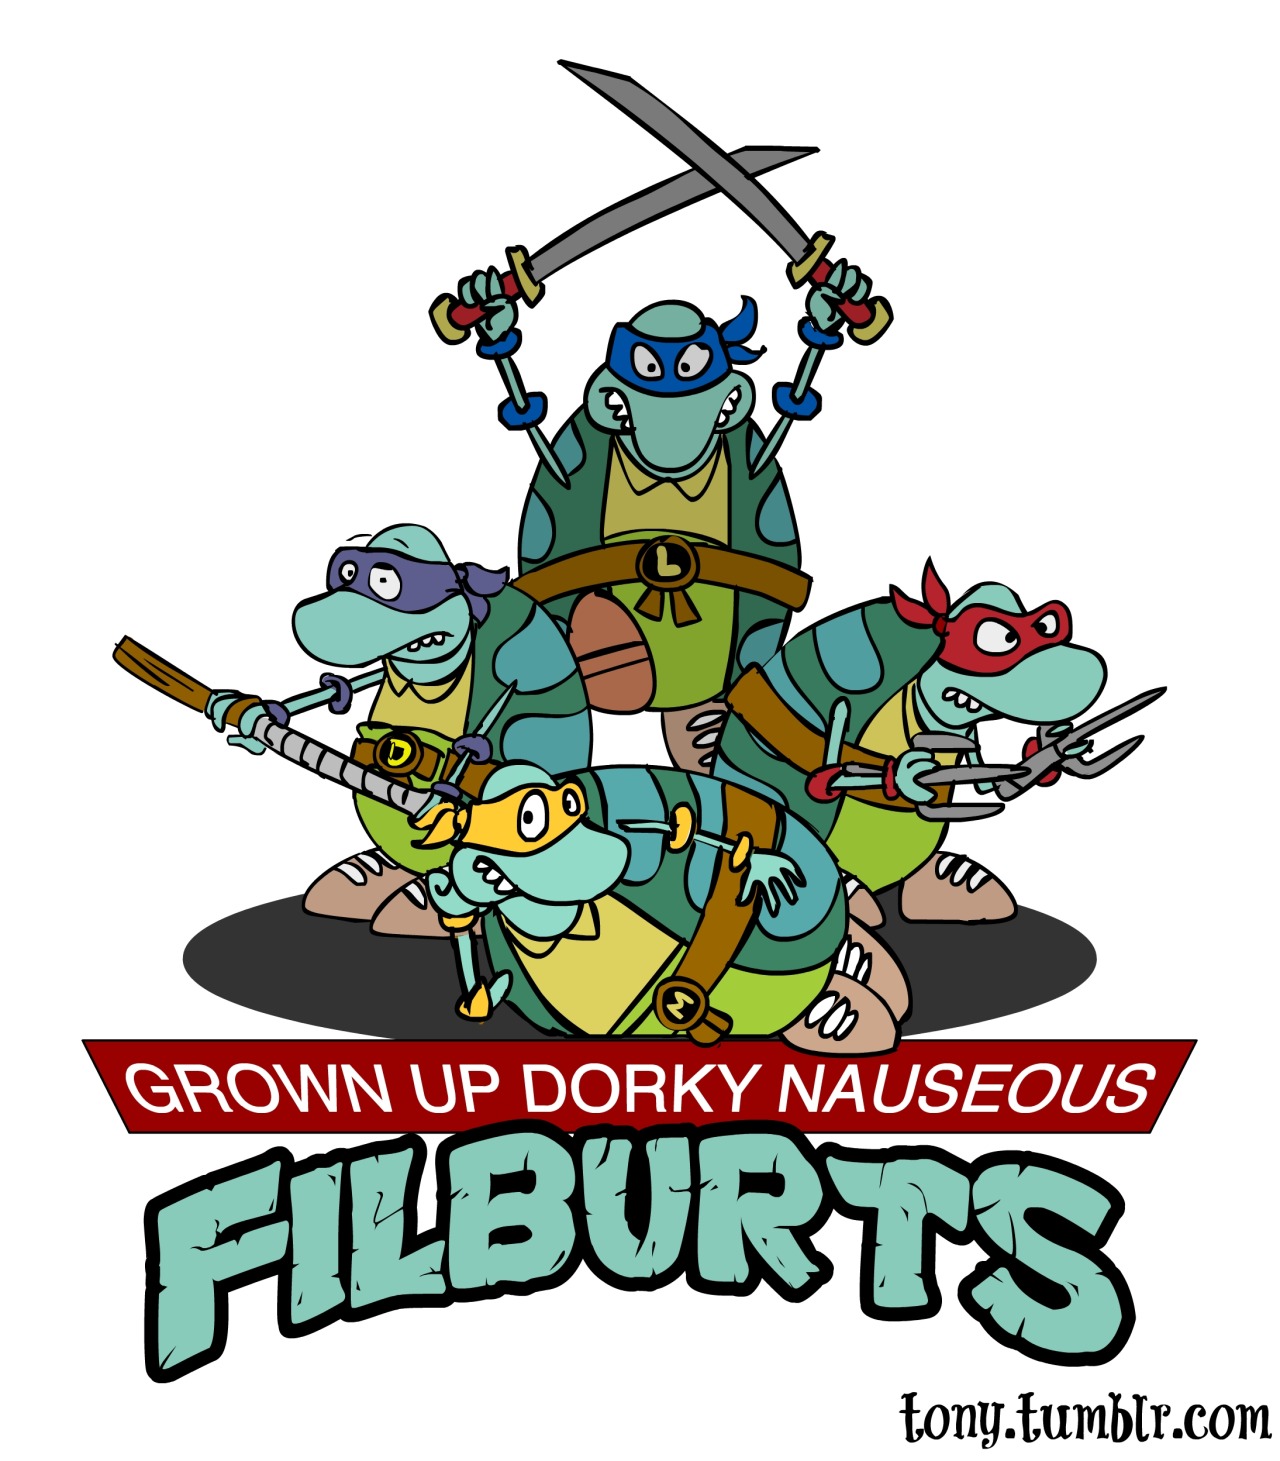 tony: In anticipation for the new Nickelodeon Movies production “Teenage Mutant Ninja Turtles”, I give you “Grown Up Dorky Nauseous Filburts”. 